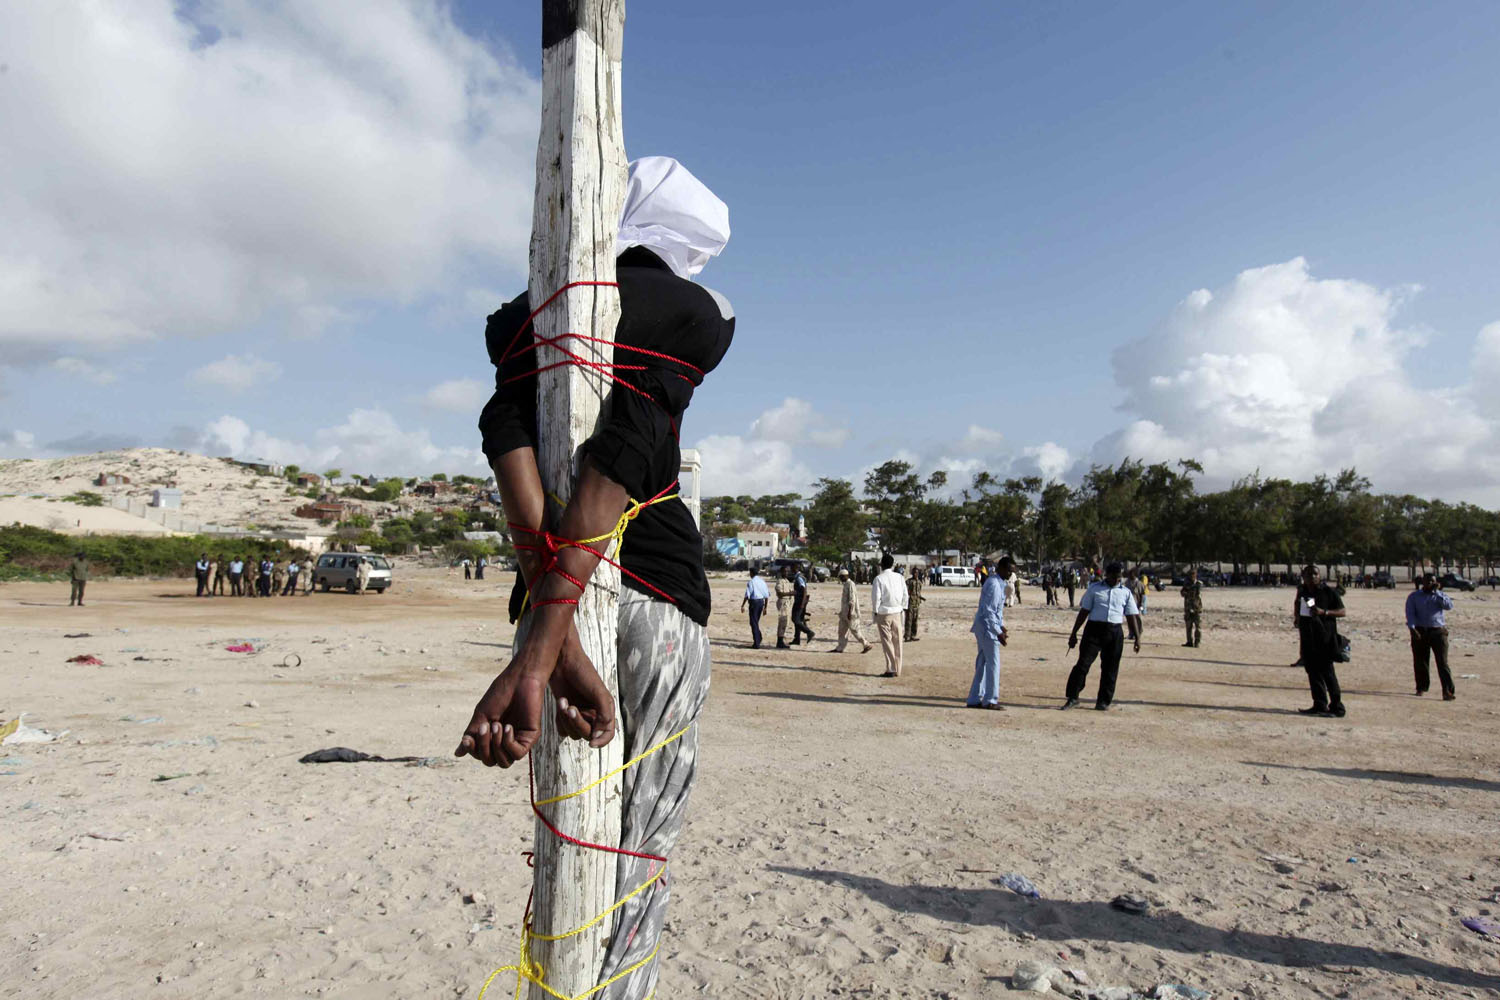 Abdi Sheikh, who has been sentenced to death for the murder of journalist Absuge, stands tied to a pole before he is executed by shooting at close range in Mogadishu